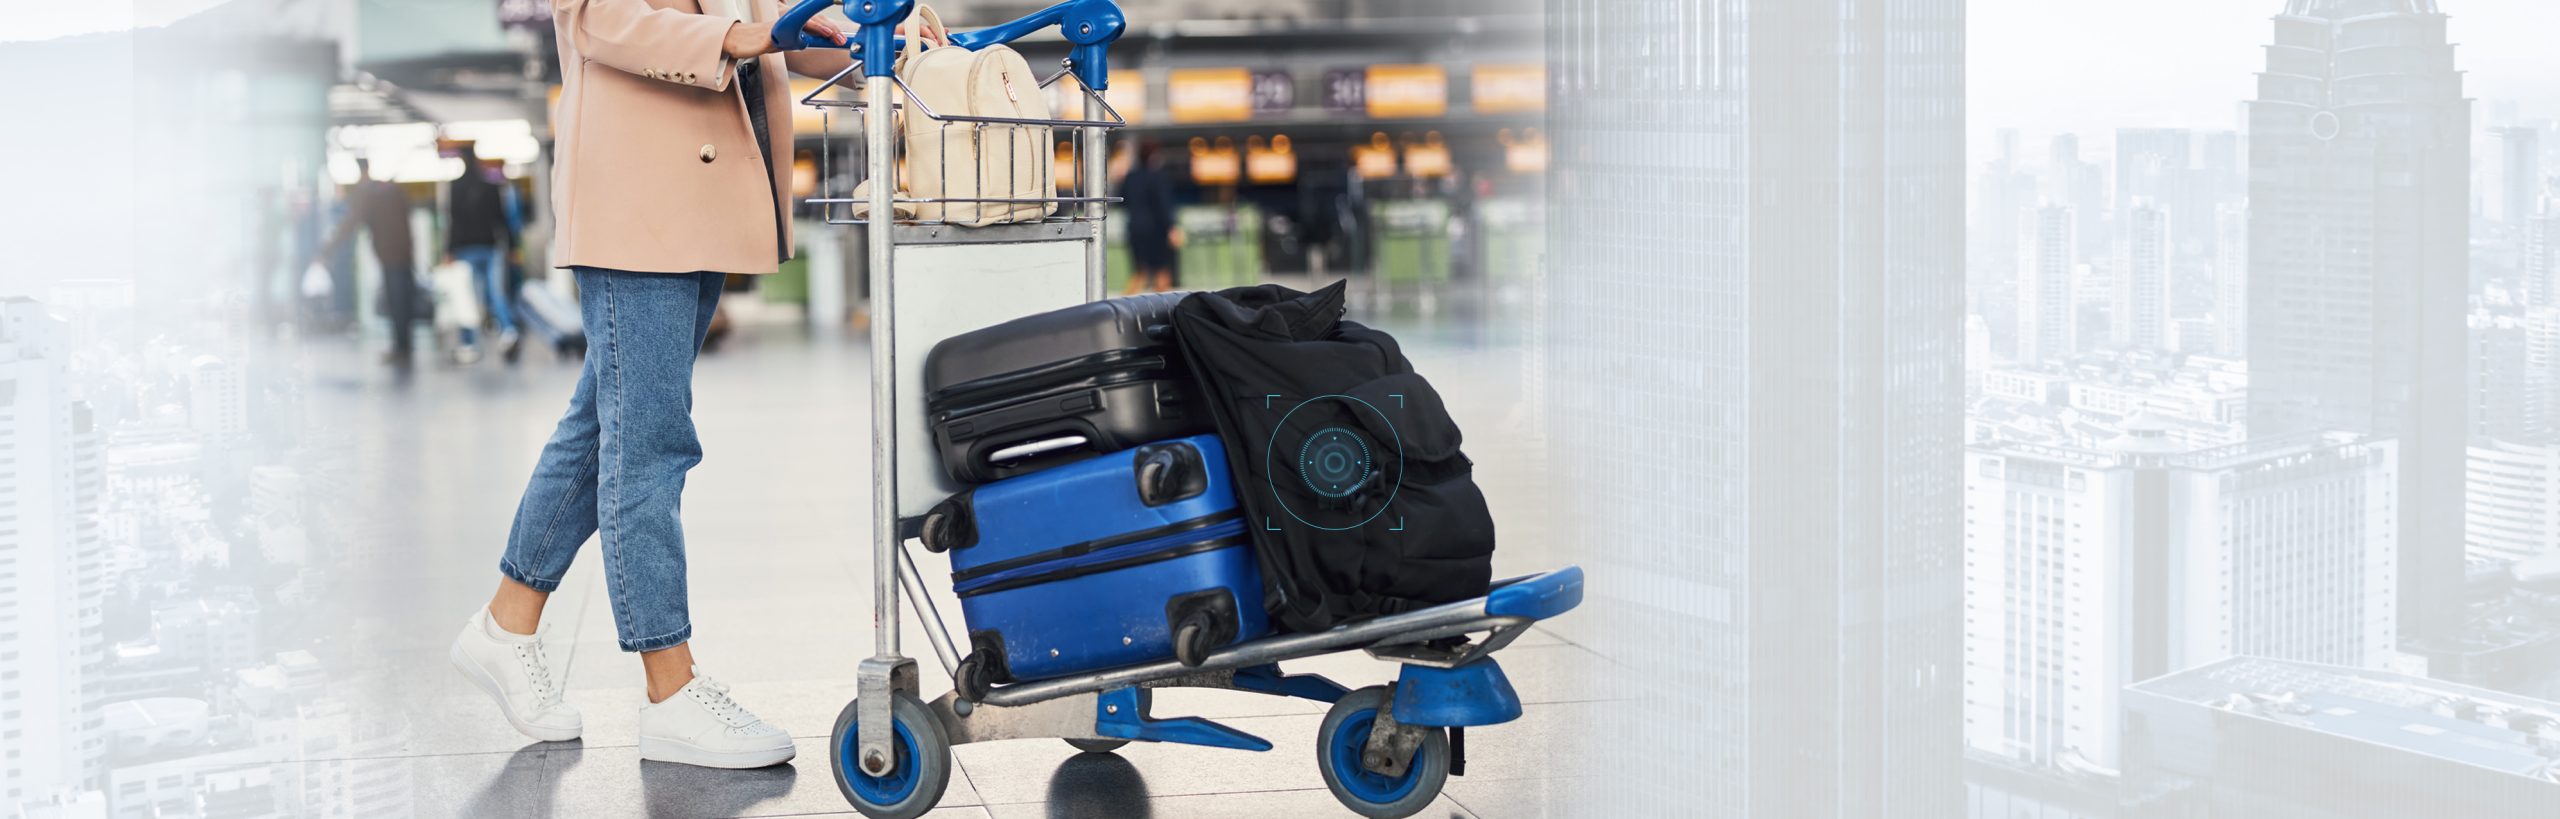 How Artificial Intelligence in Travel Can Enable Smart Baggage Handling at Airports?